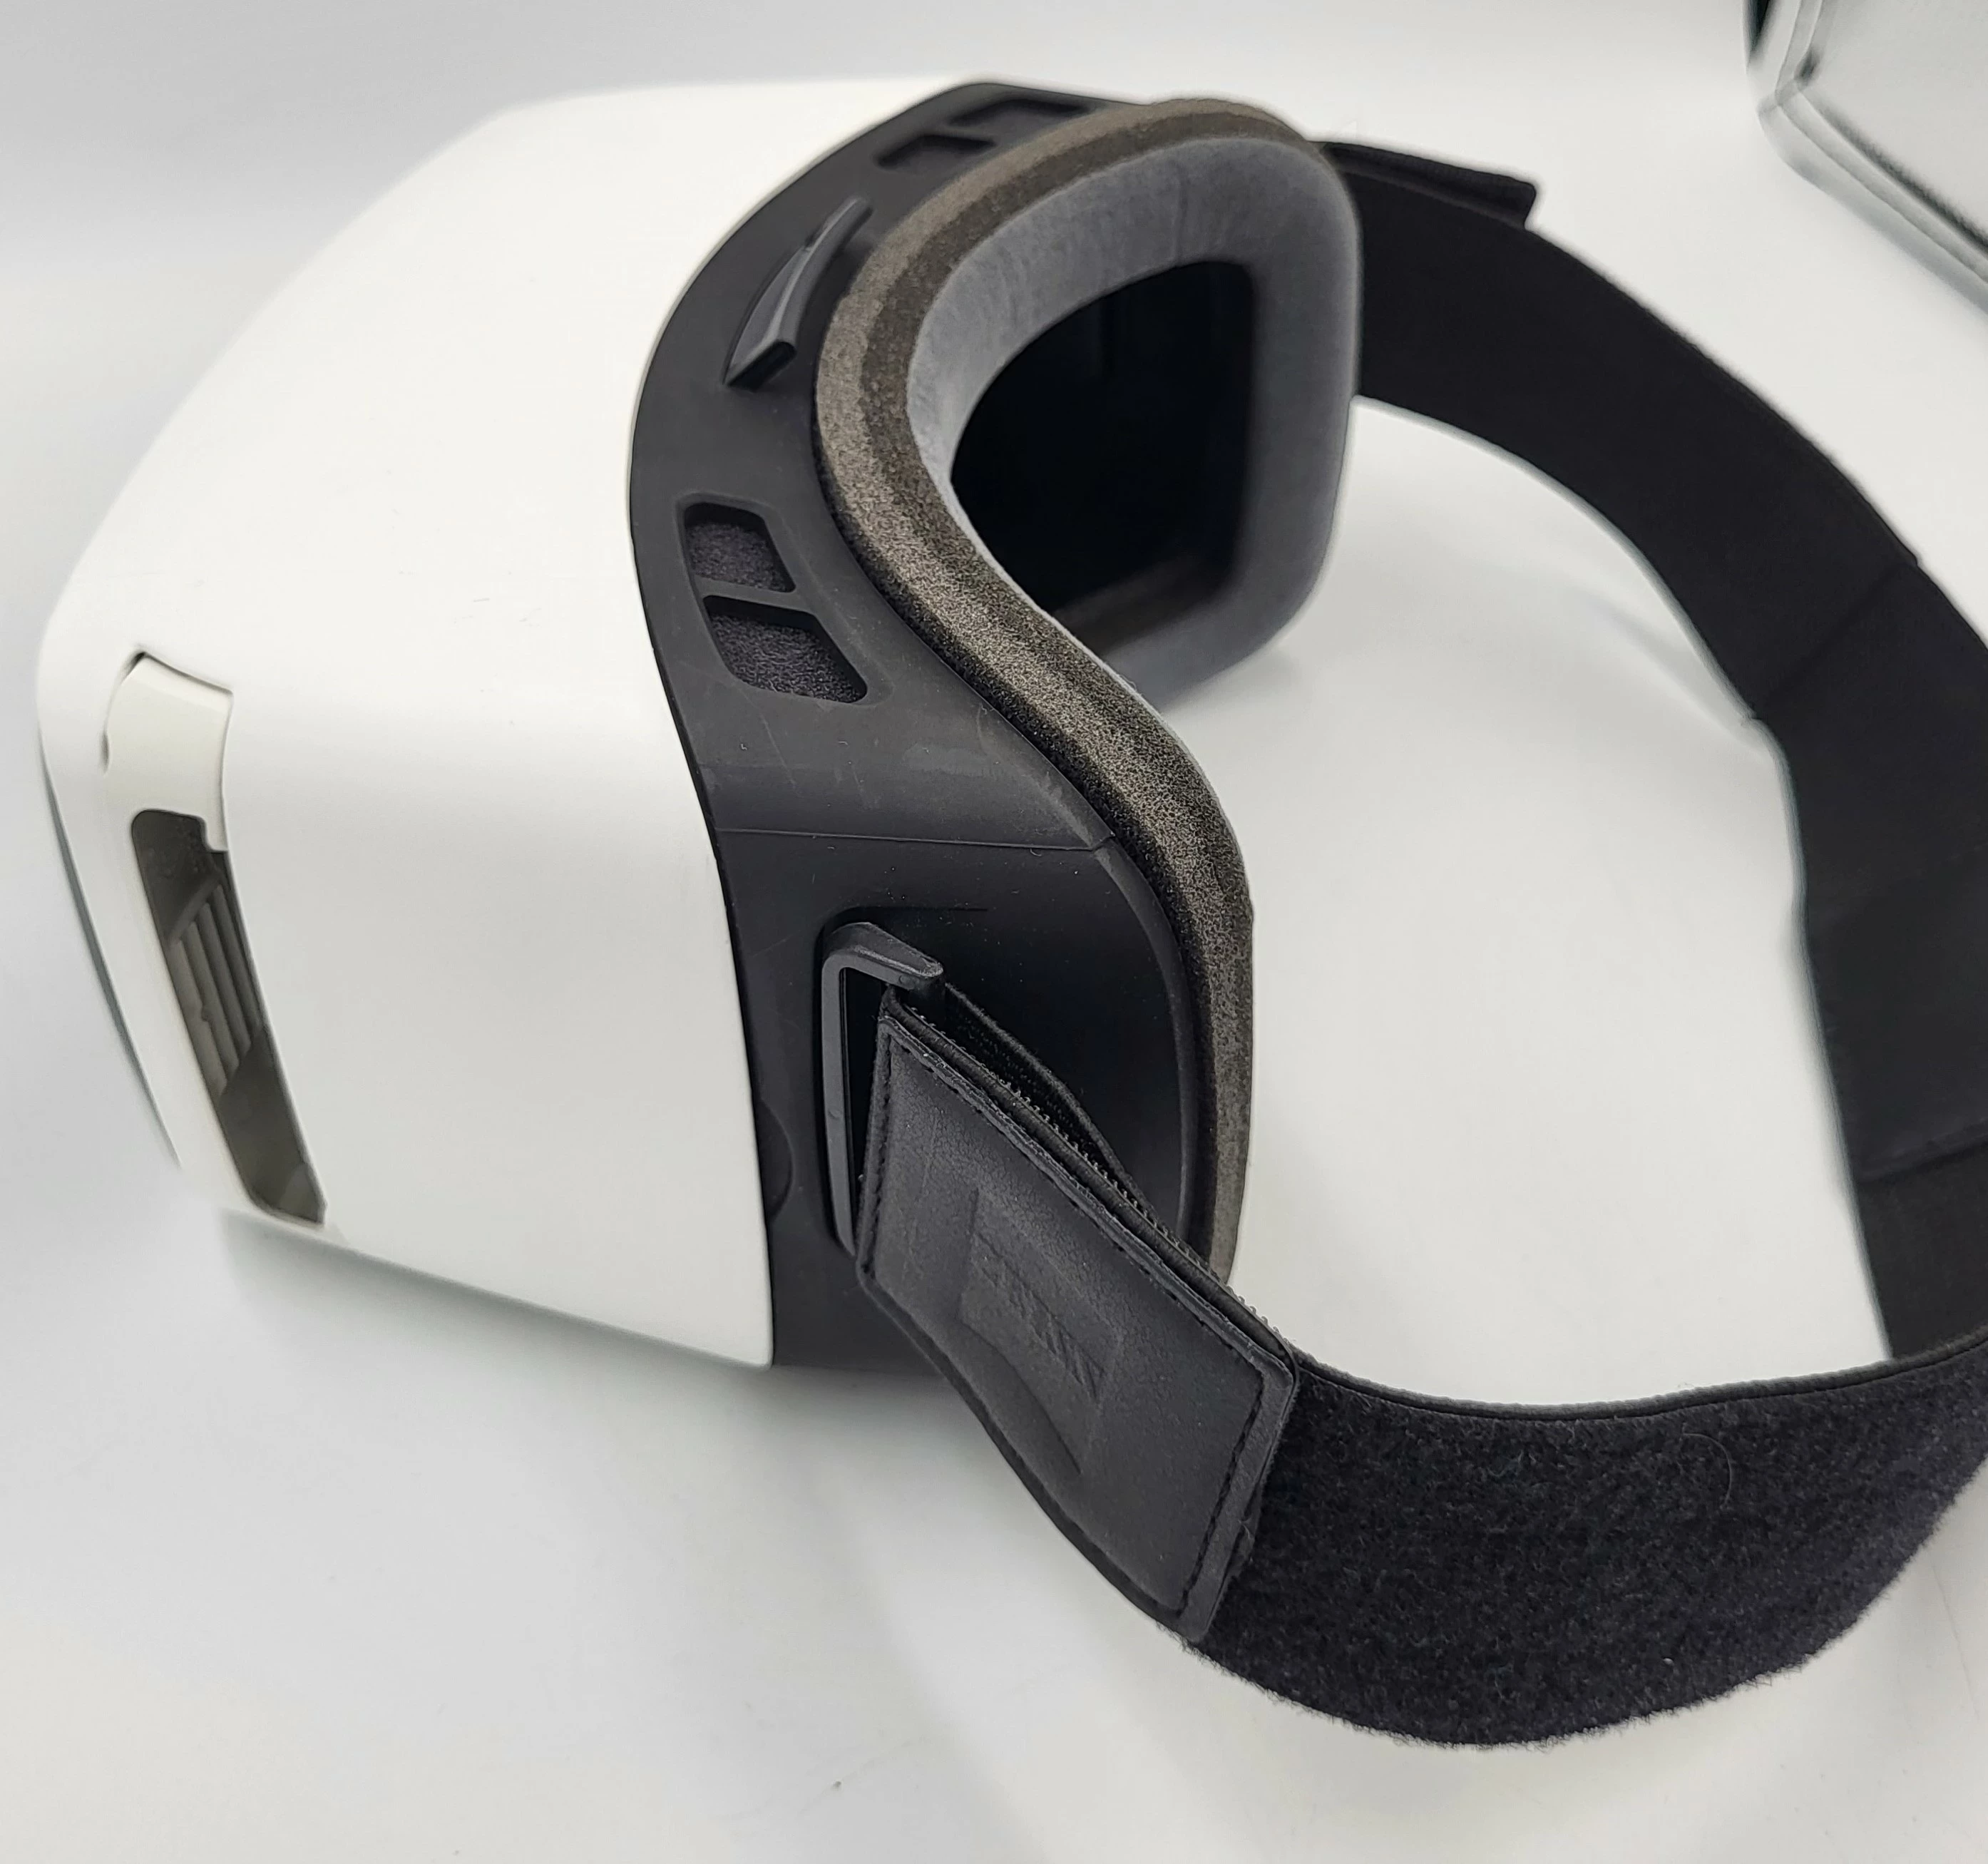 VR ZEISS VR ONE PLUS | | Loombard.pl